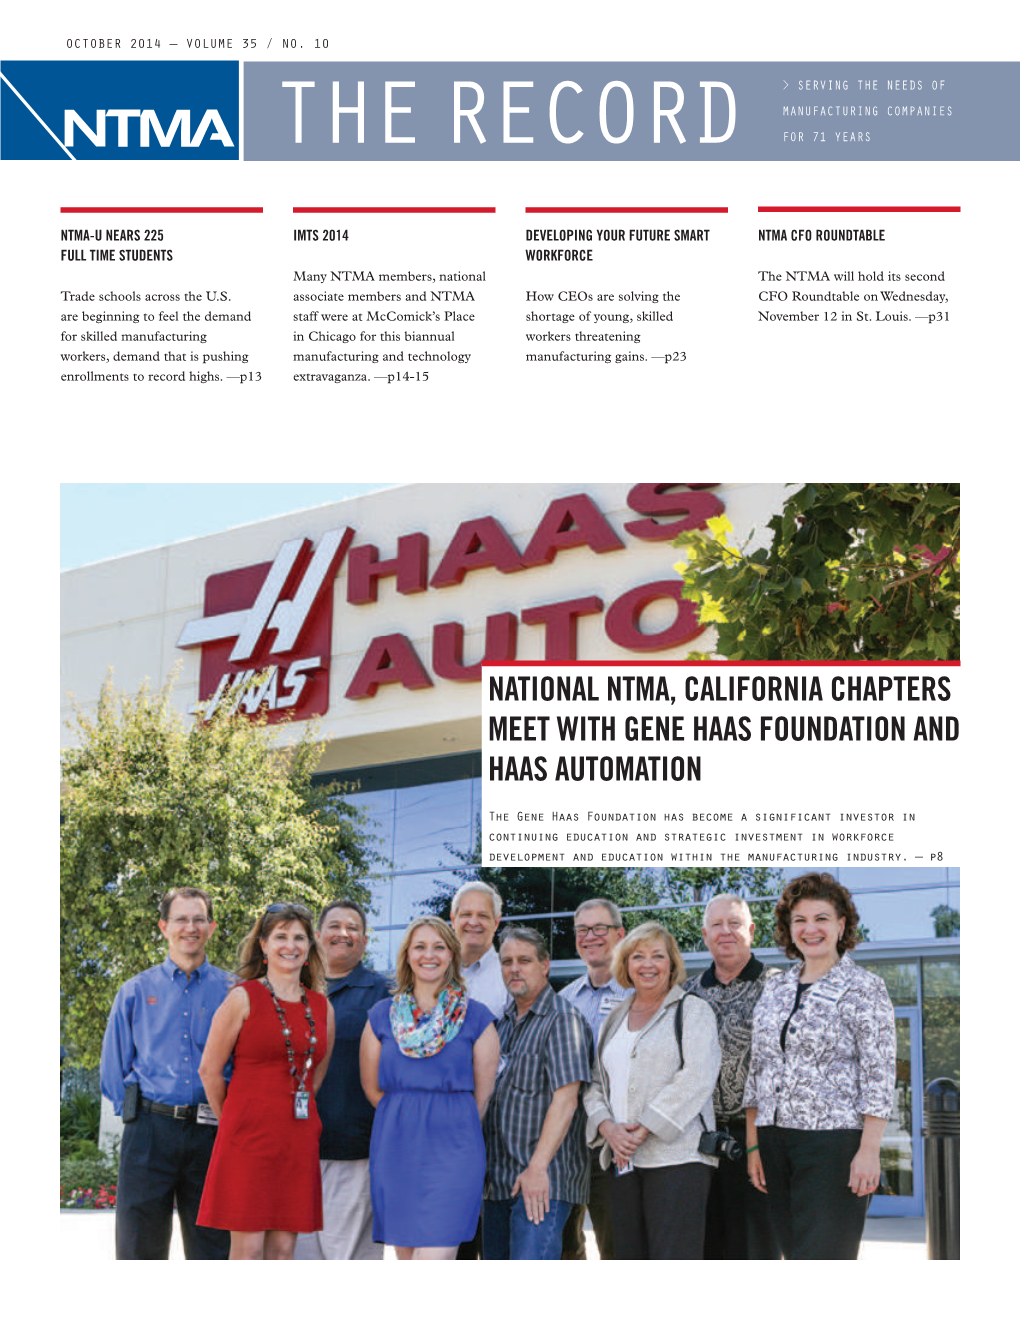 National NTMA, California Chapters Meet with Gene Haas Foundation and Haas Automation